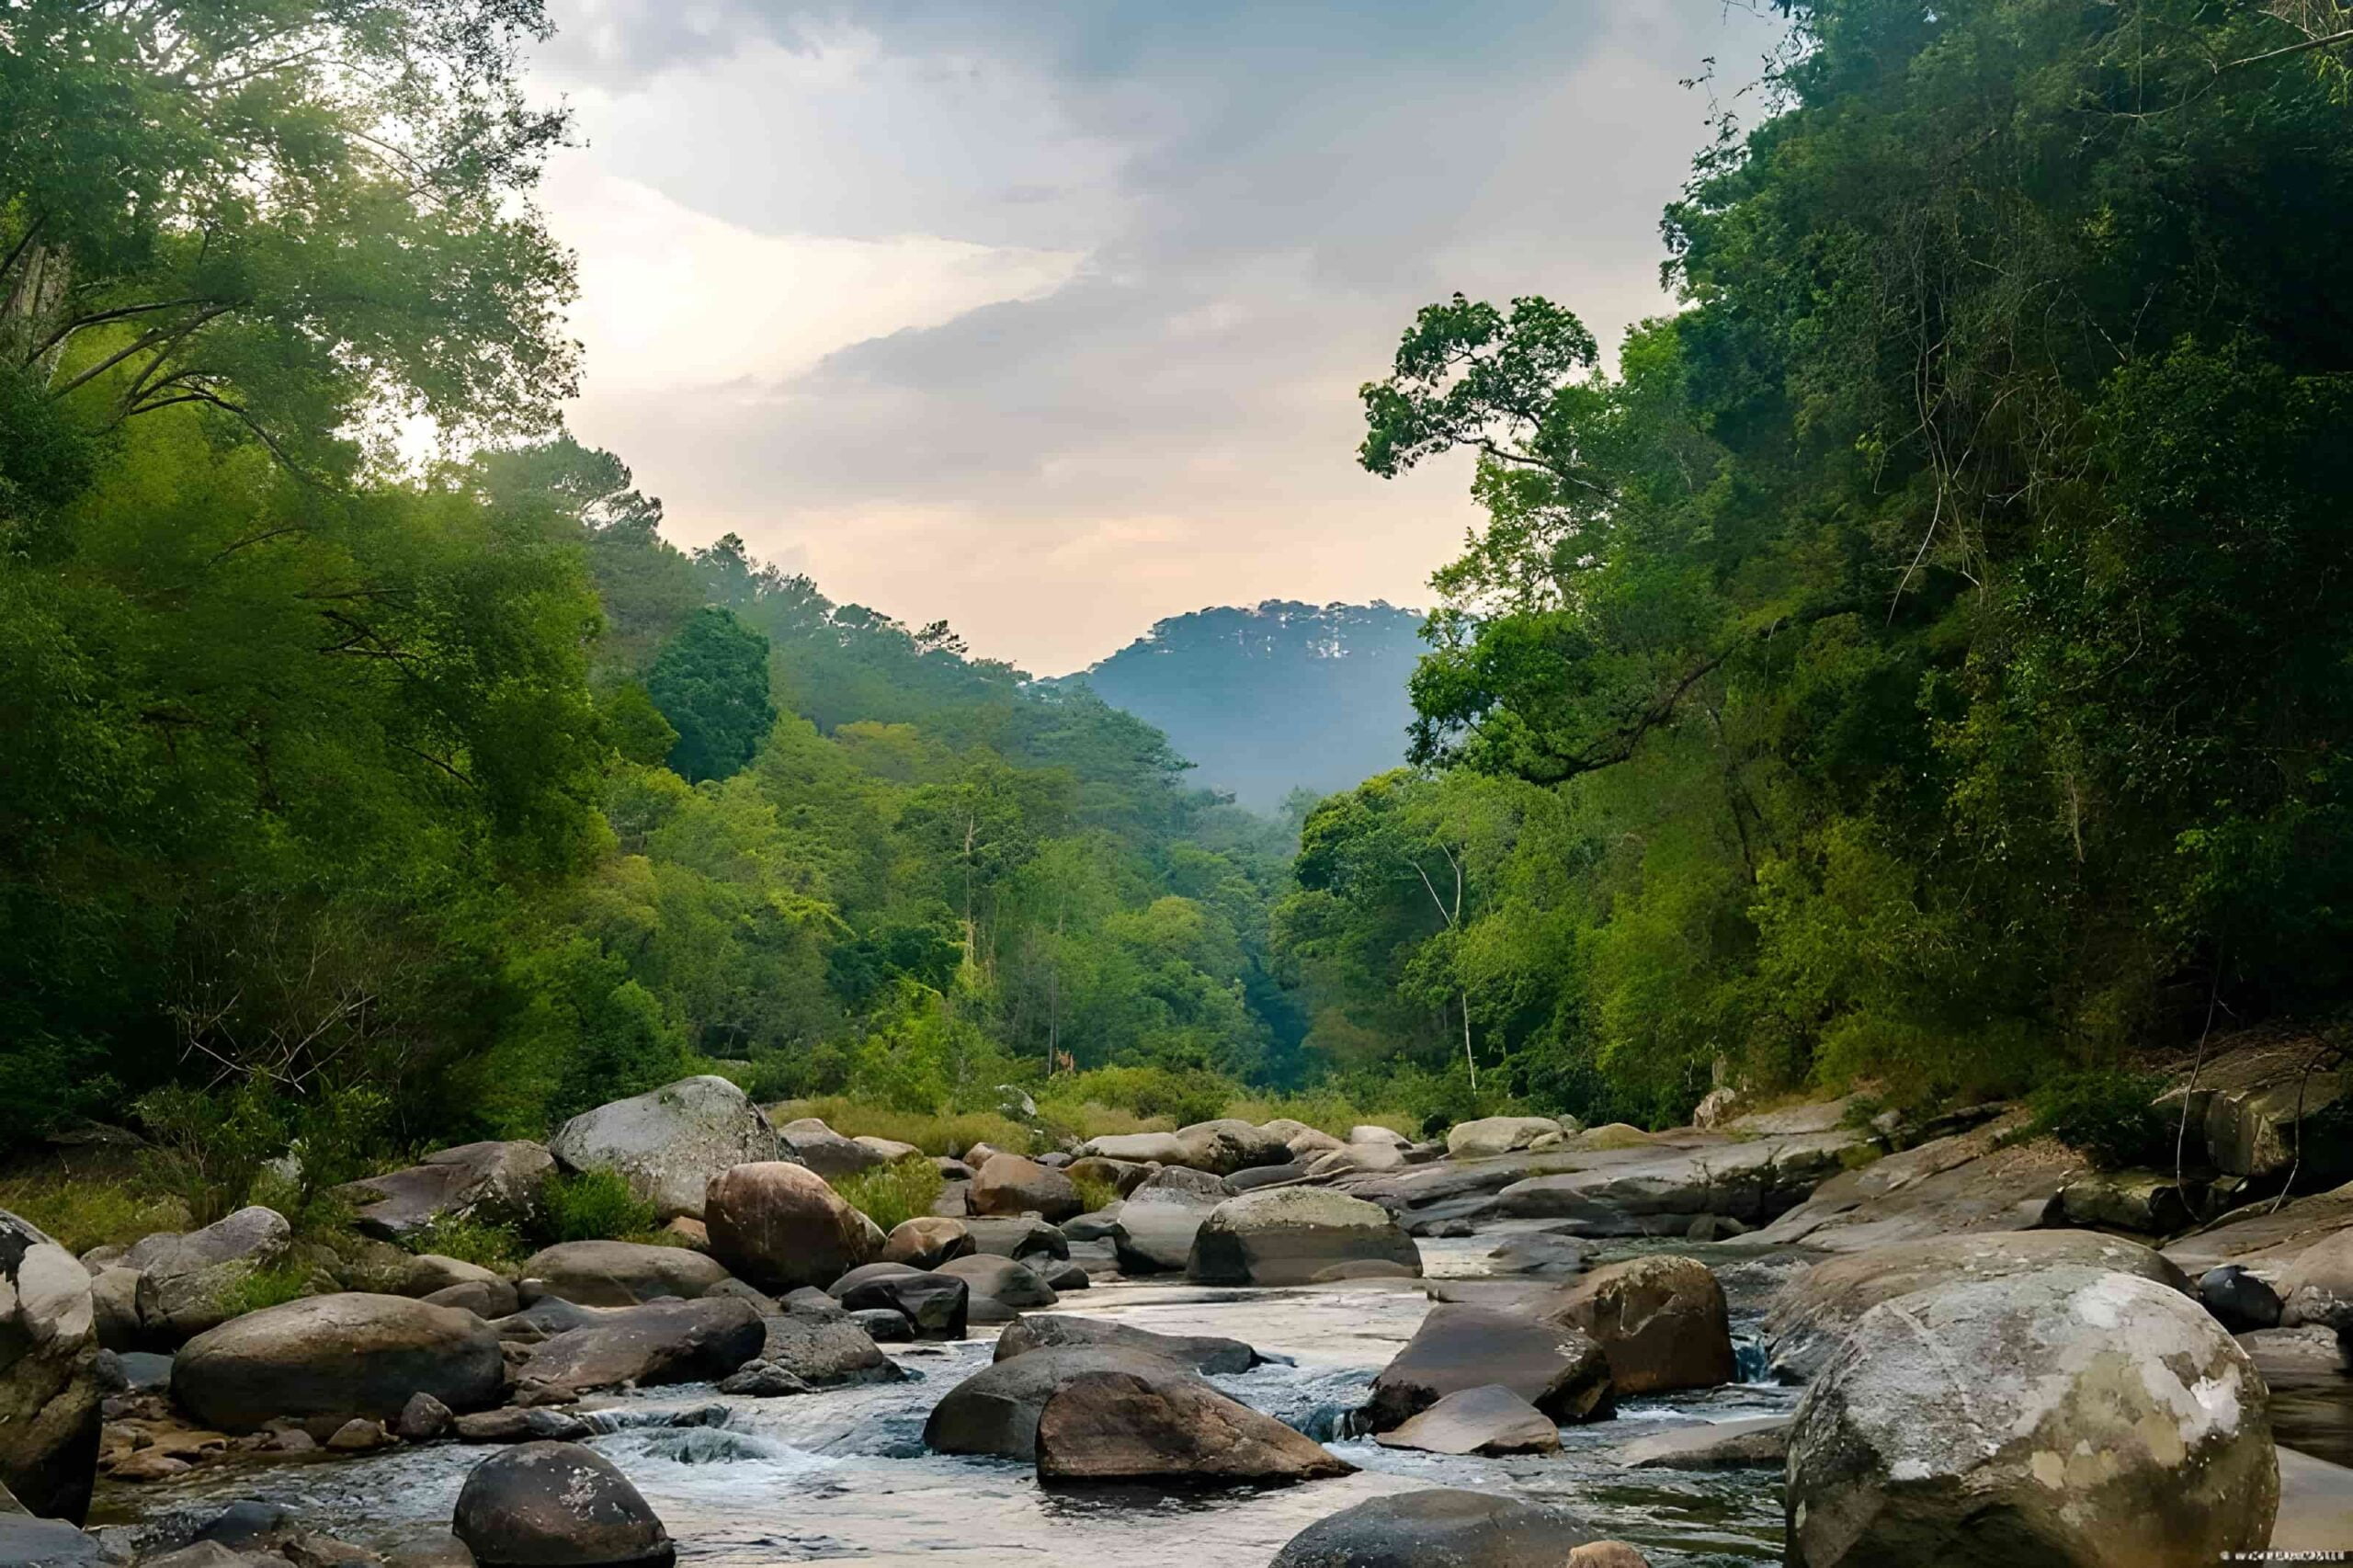 Chu Yang Sin National Park is one of the two most famous national parks of Dak Lak province